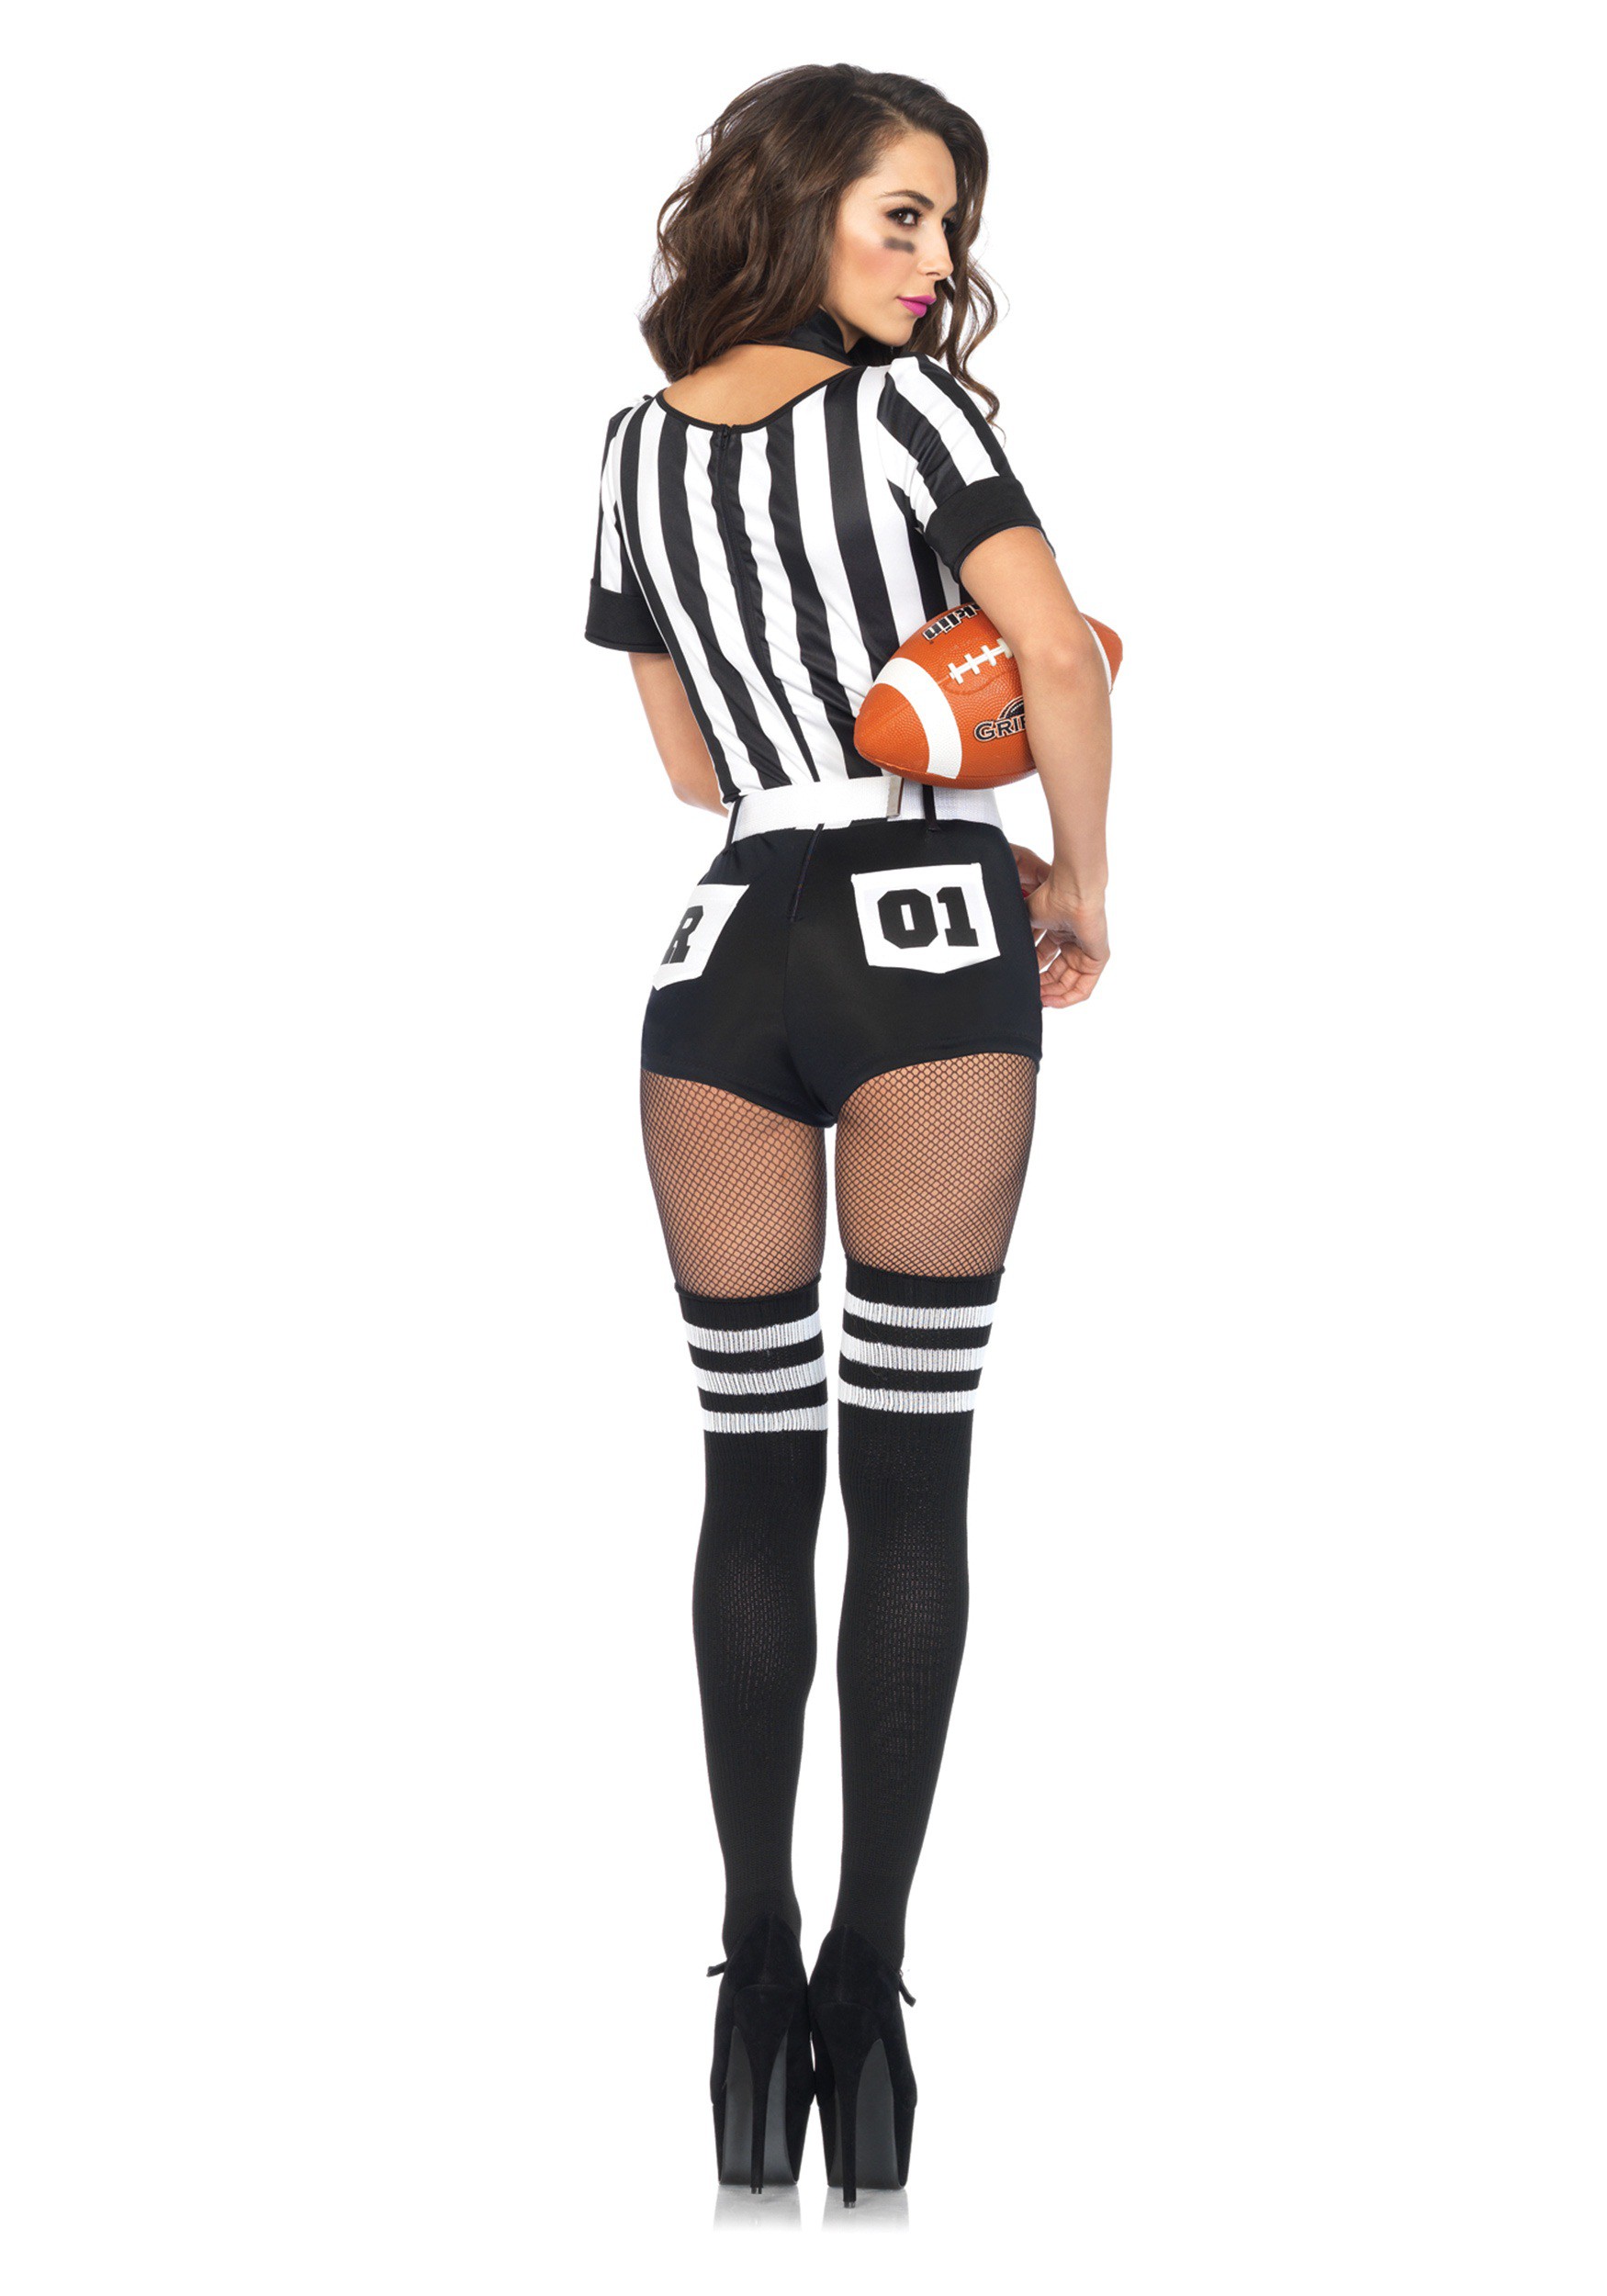 Newcotte 4 Pcs Halloween Women Baseball Player Costume, Red Referee Hat Blue Short Pants Striped Shirt Stocking for Cosplay